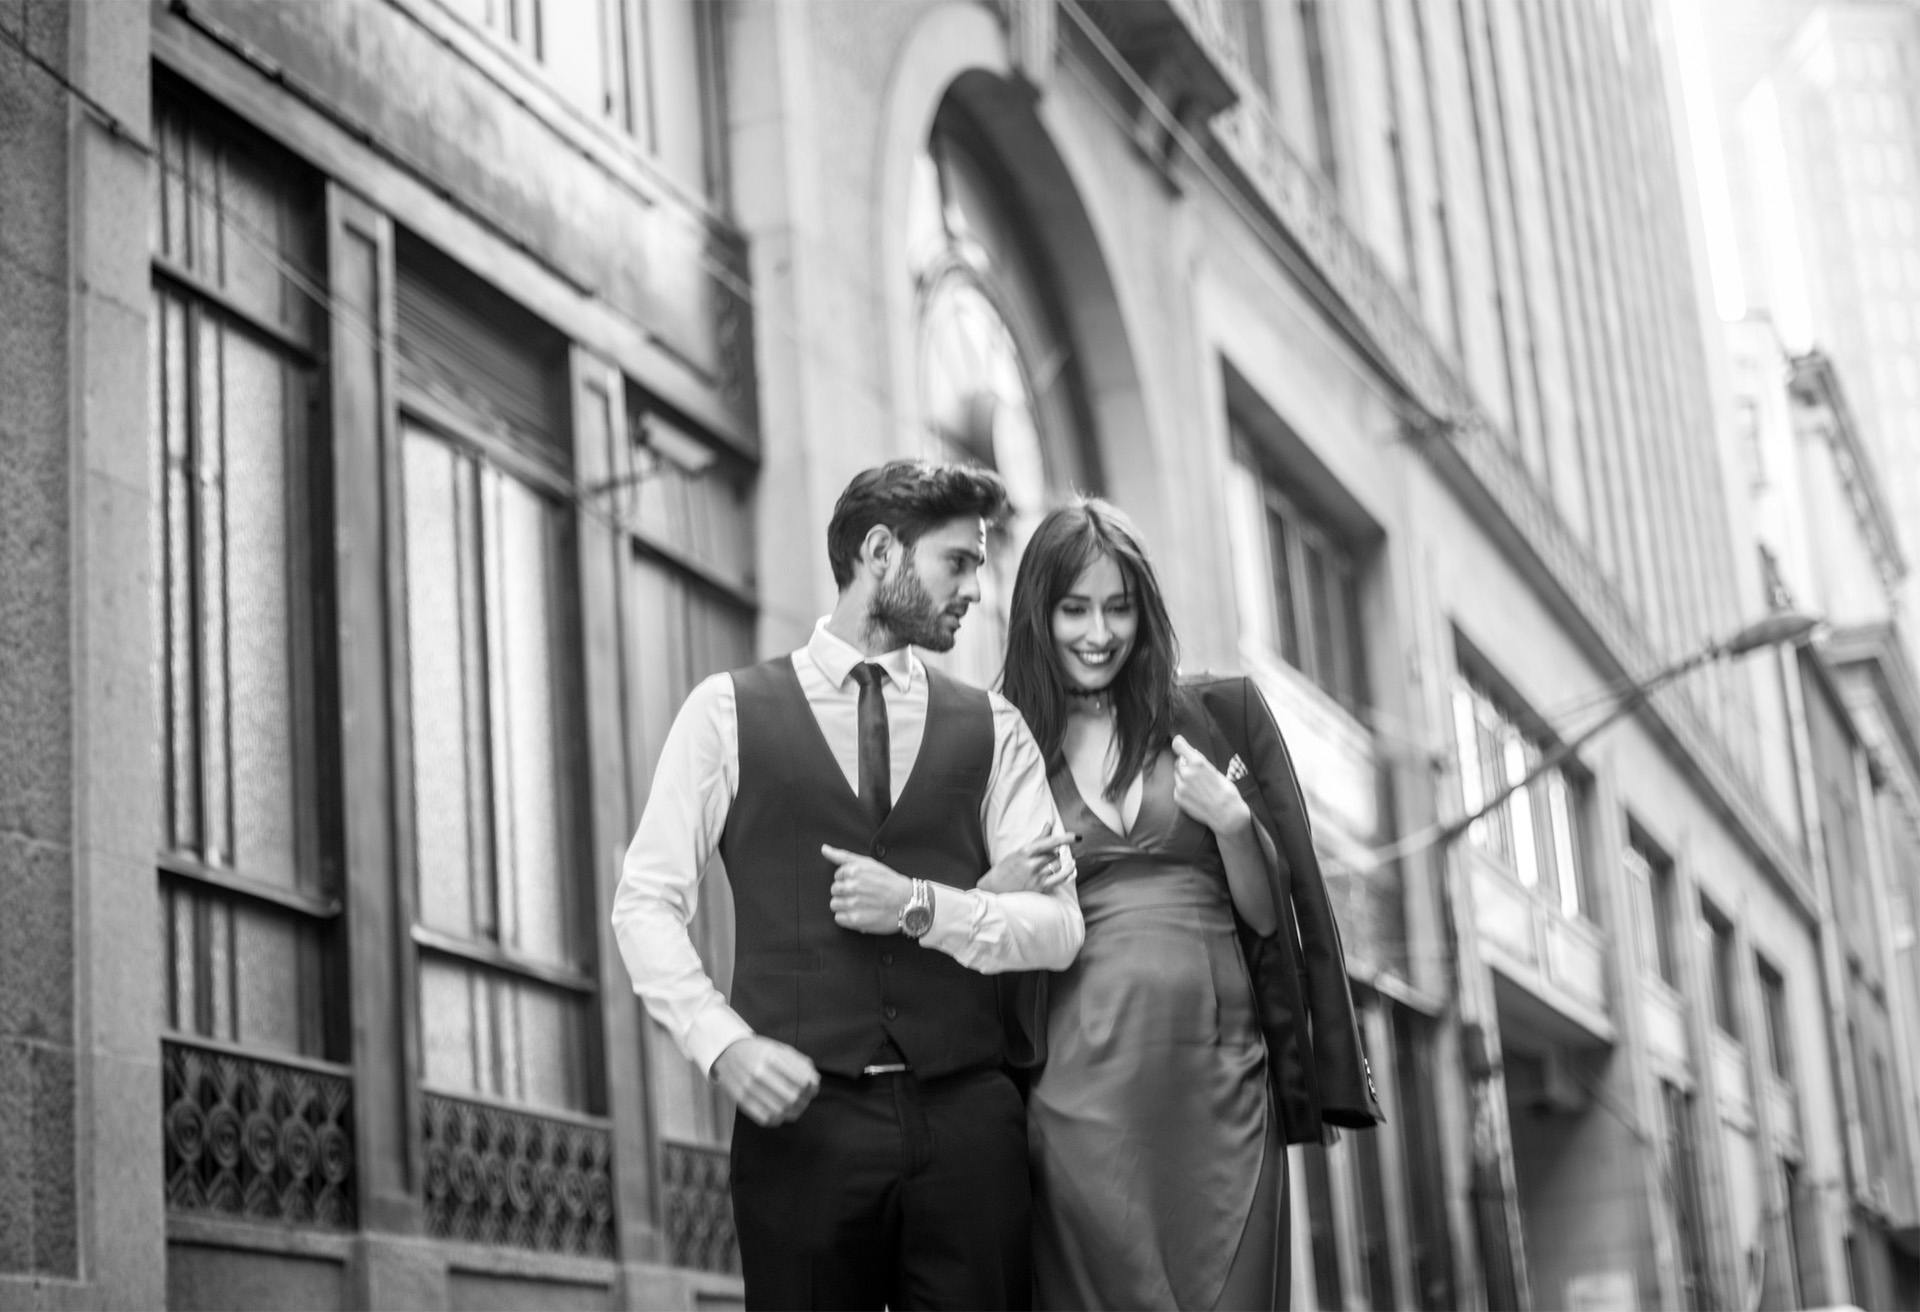 Black and white image of a couple dressed up walking downtown